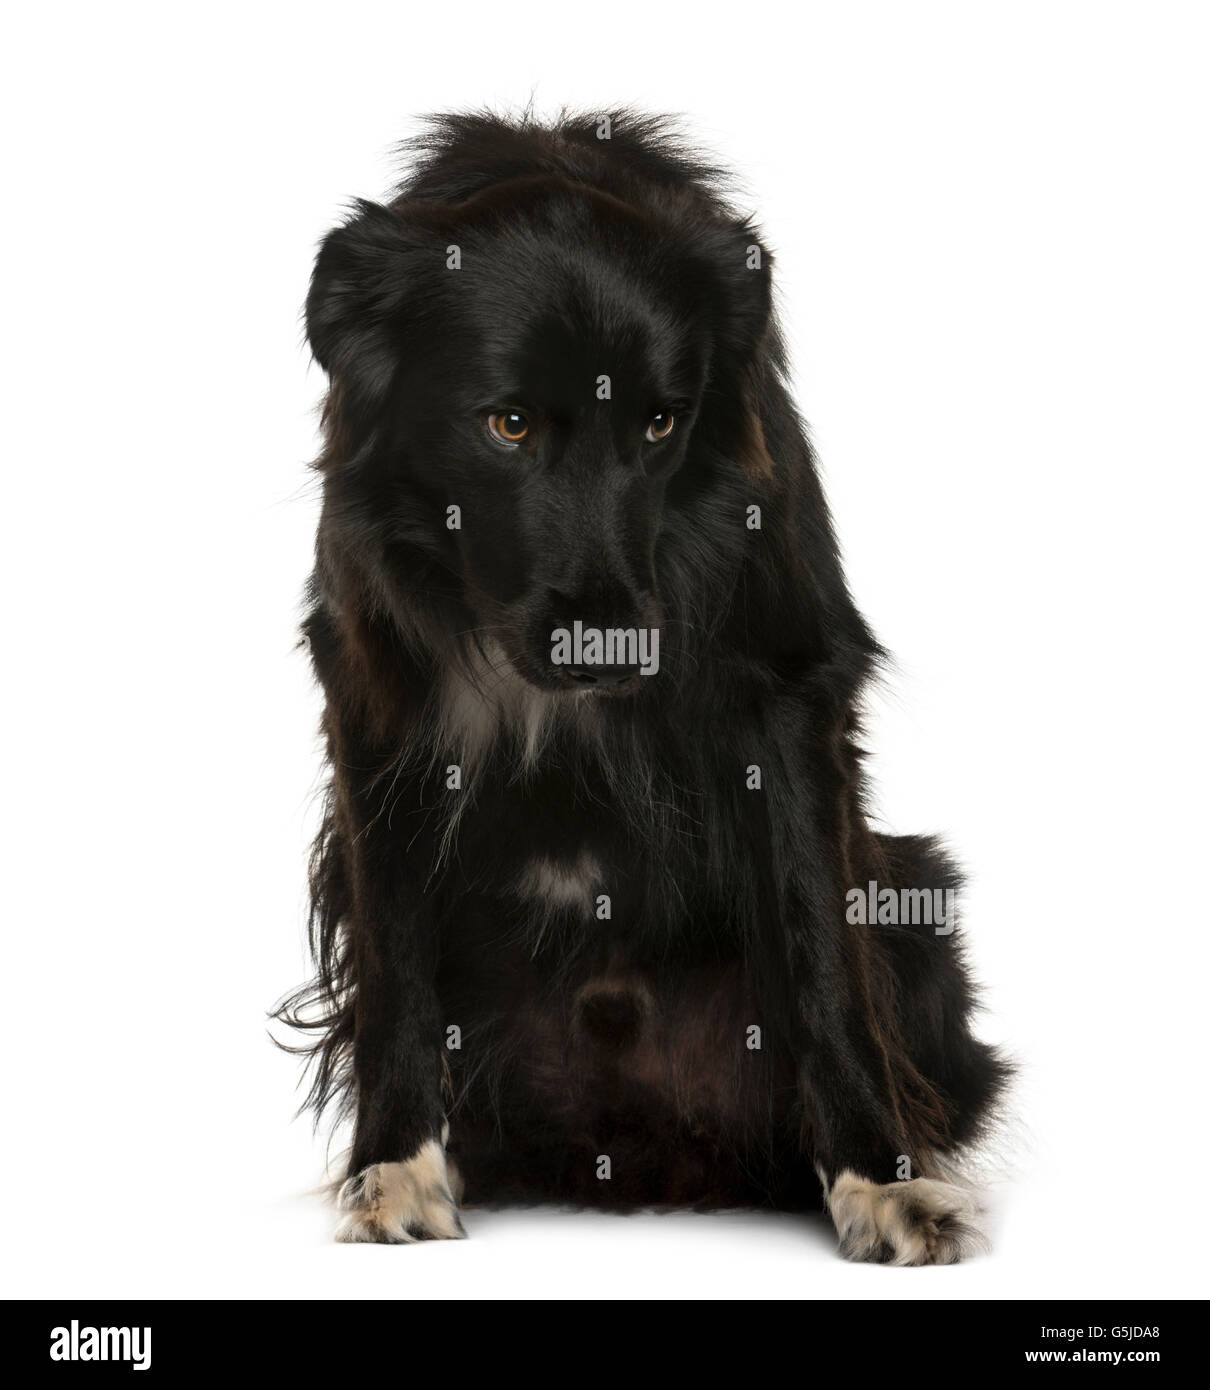 Submissive Crossbreed sitting in front of white background Stock Photo